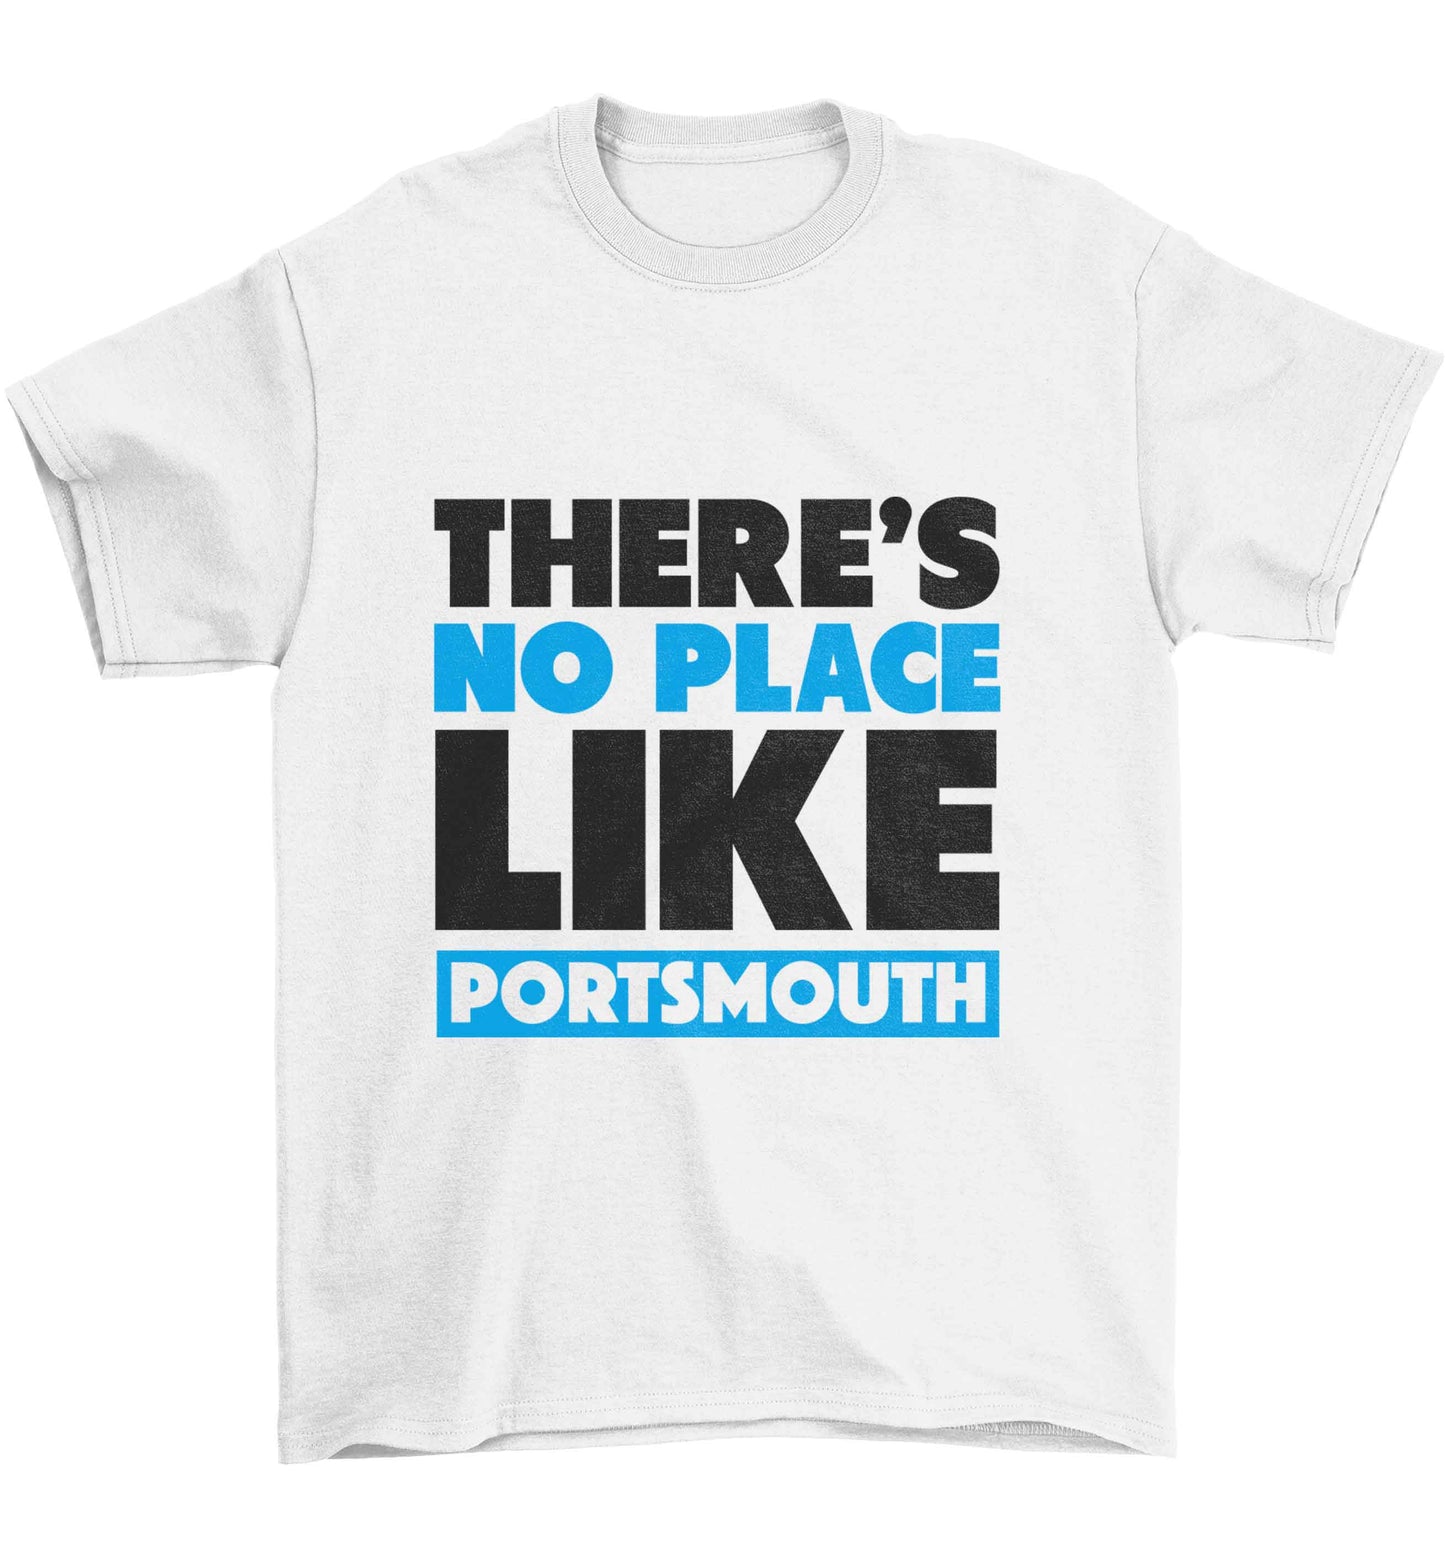 There's no place like Porstmouth Children's white Tshirt 12-13 Years